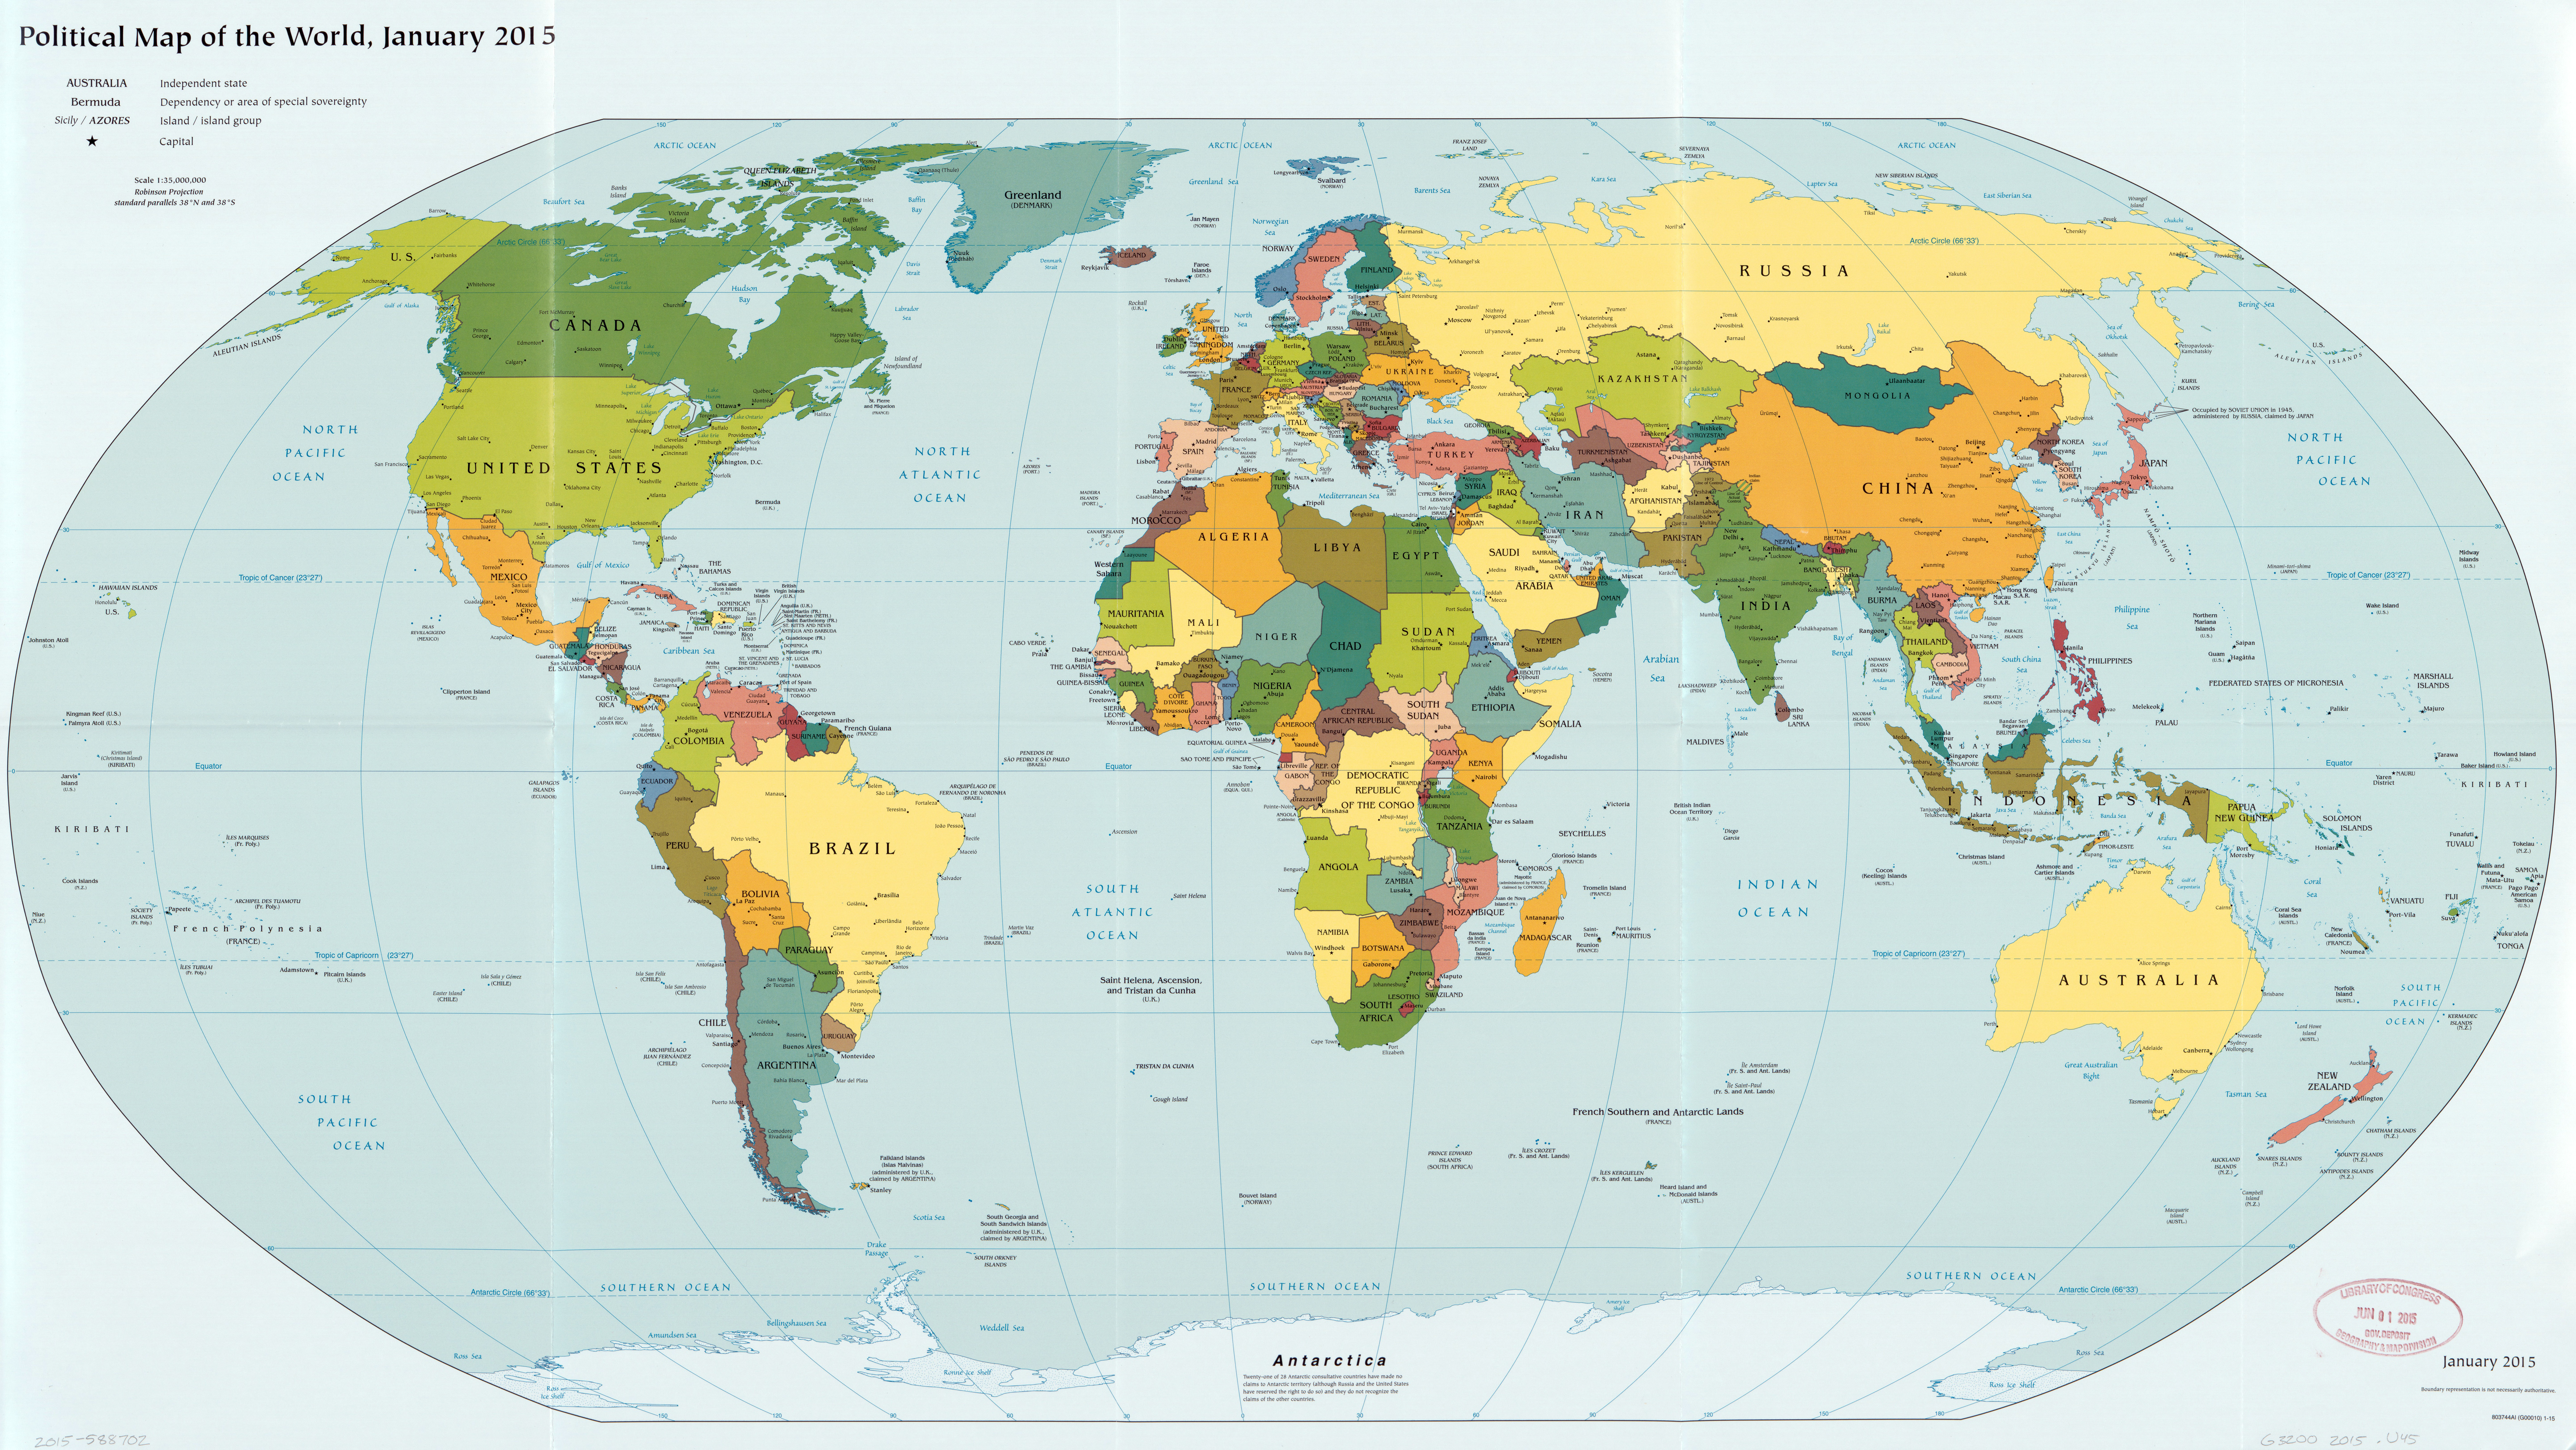 scale map of the world Large Scale Political Map Of The World 2015 World Mapsland scale map of the world